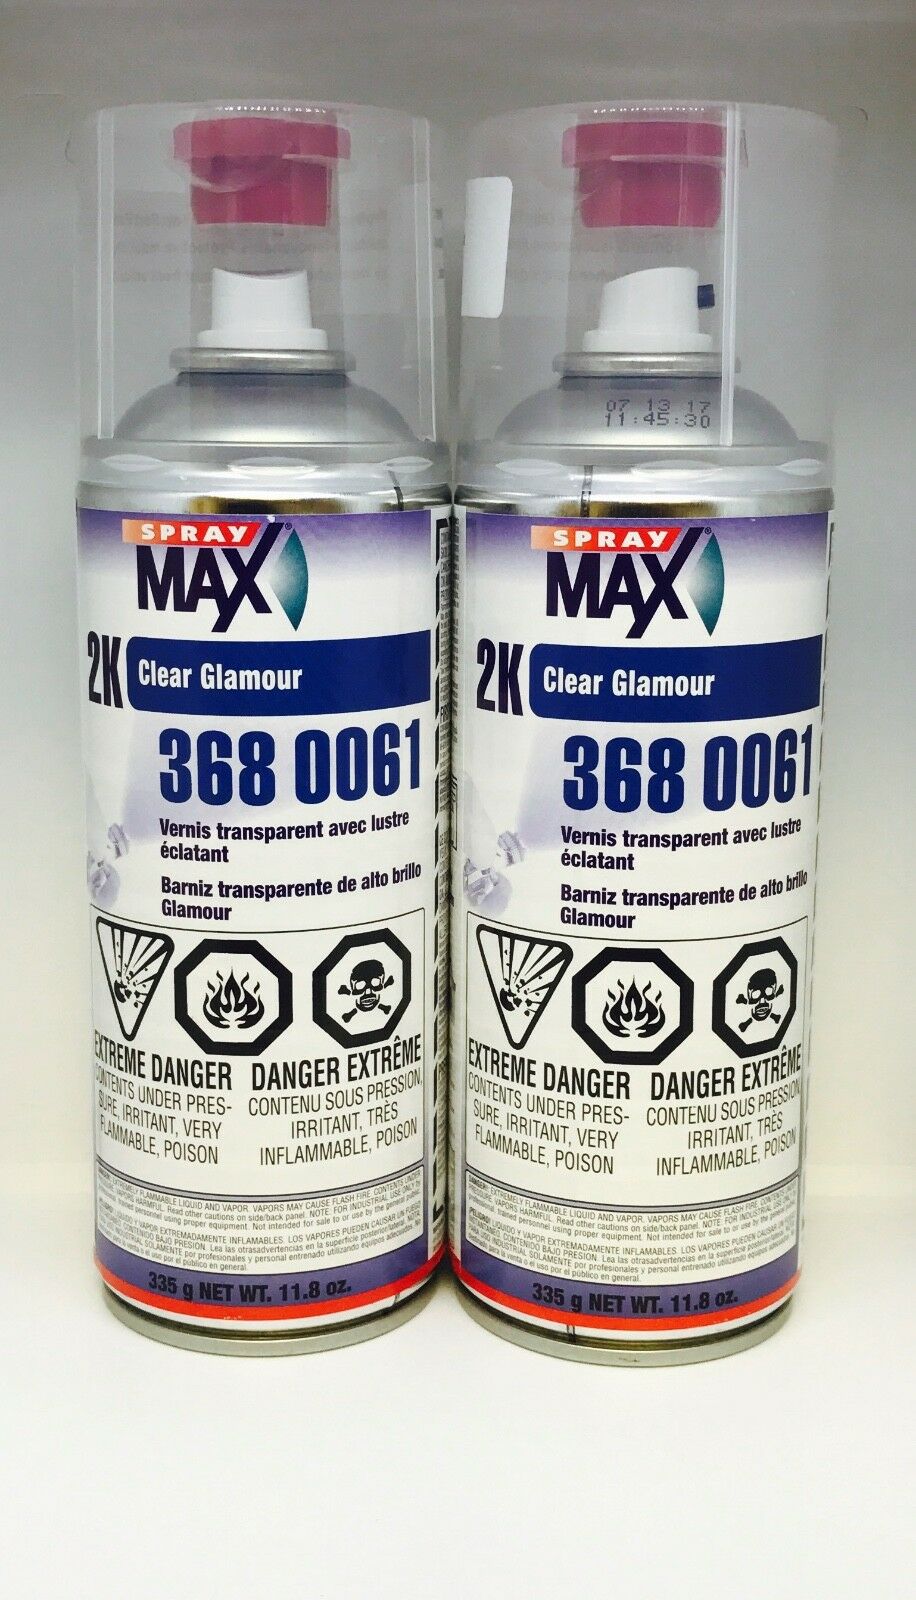 2 Cans Usc-3680061 Spraymax 2k Glamour Clear Gloss Clearcoat Aerosol(usc3680061)